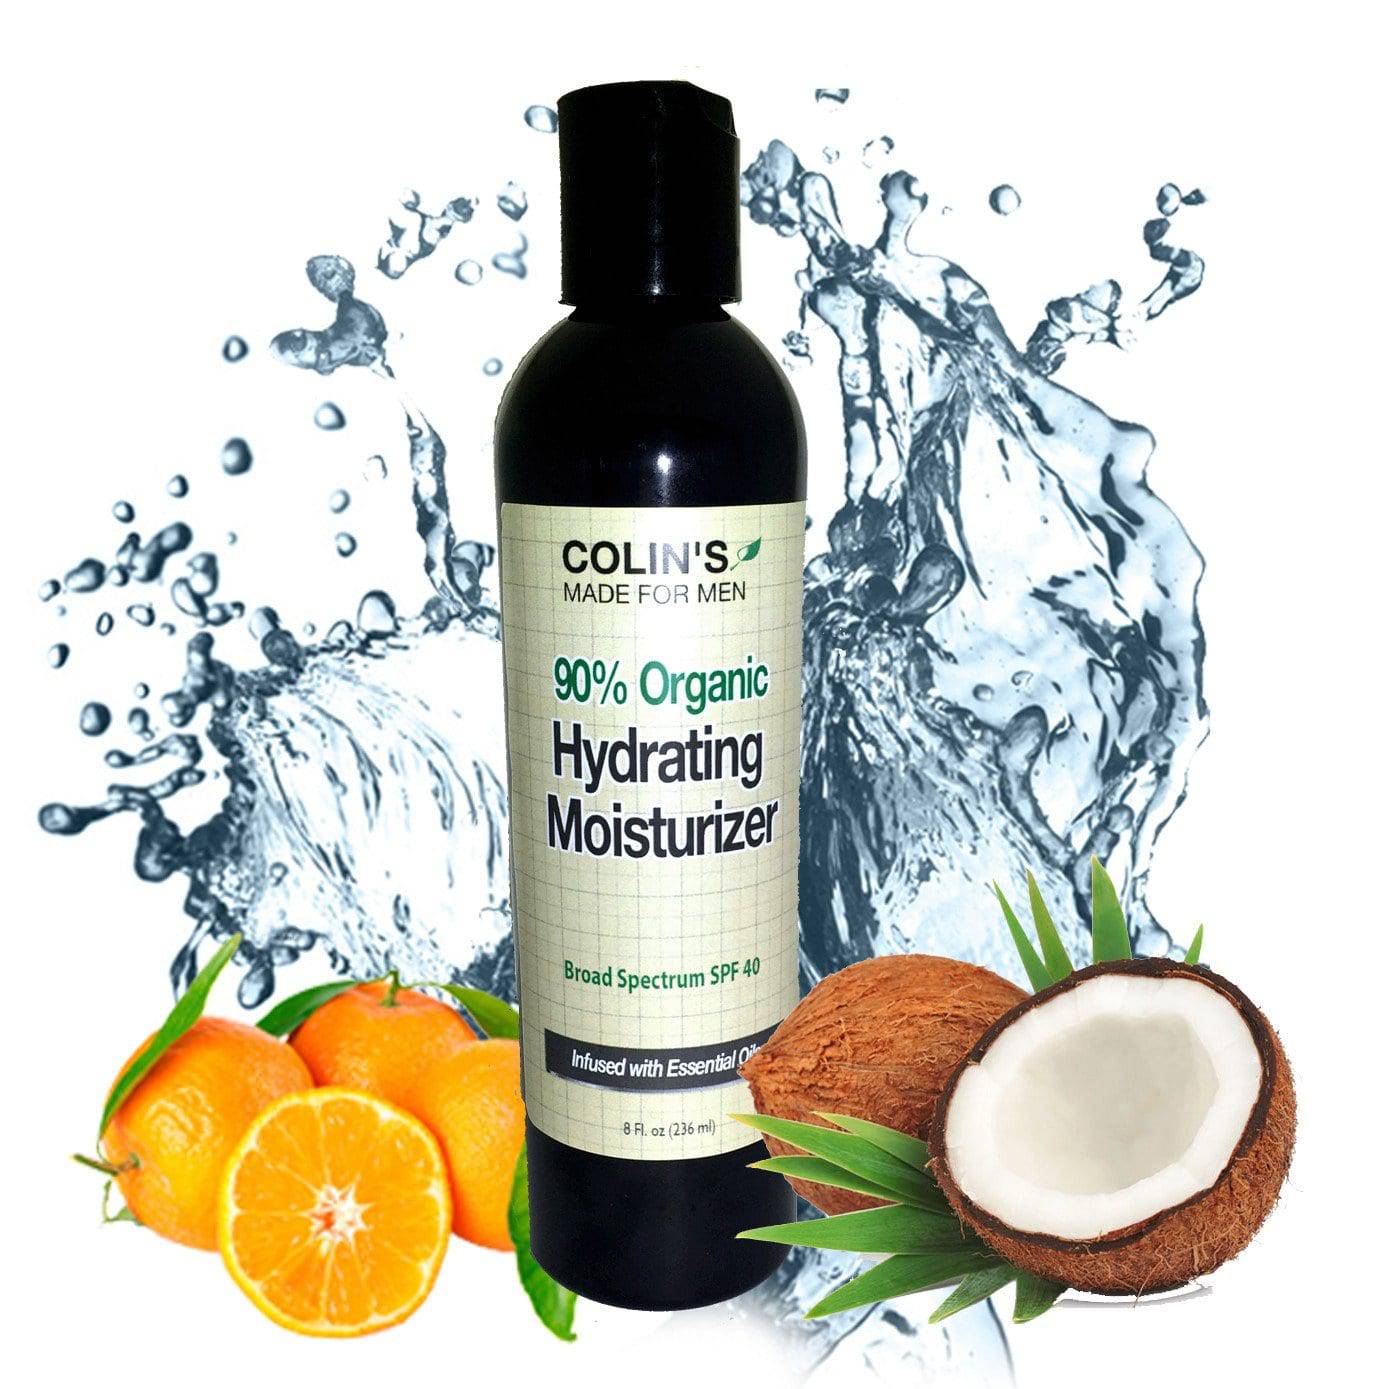 Bottle of Organic Mens Face Cream - Broad Spectrum SPF 40, surrounded by splashing water, oranges, and a coconut half.